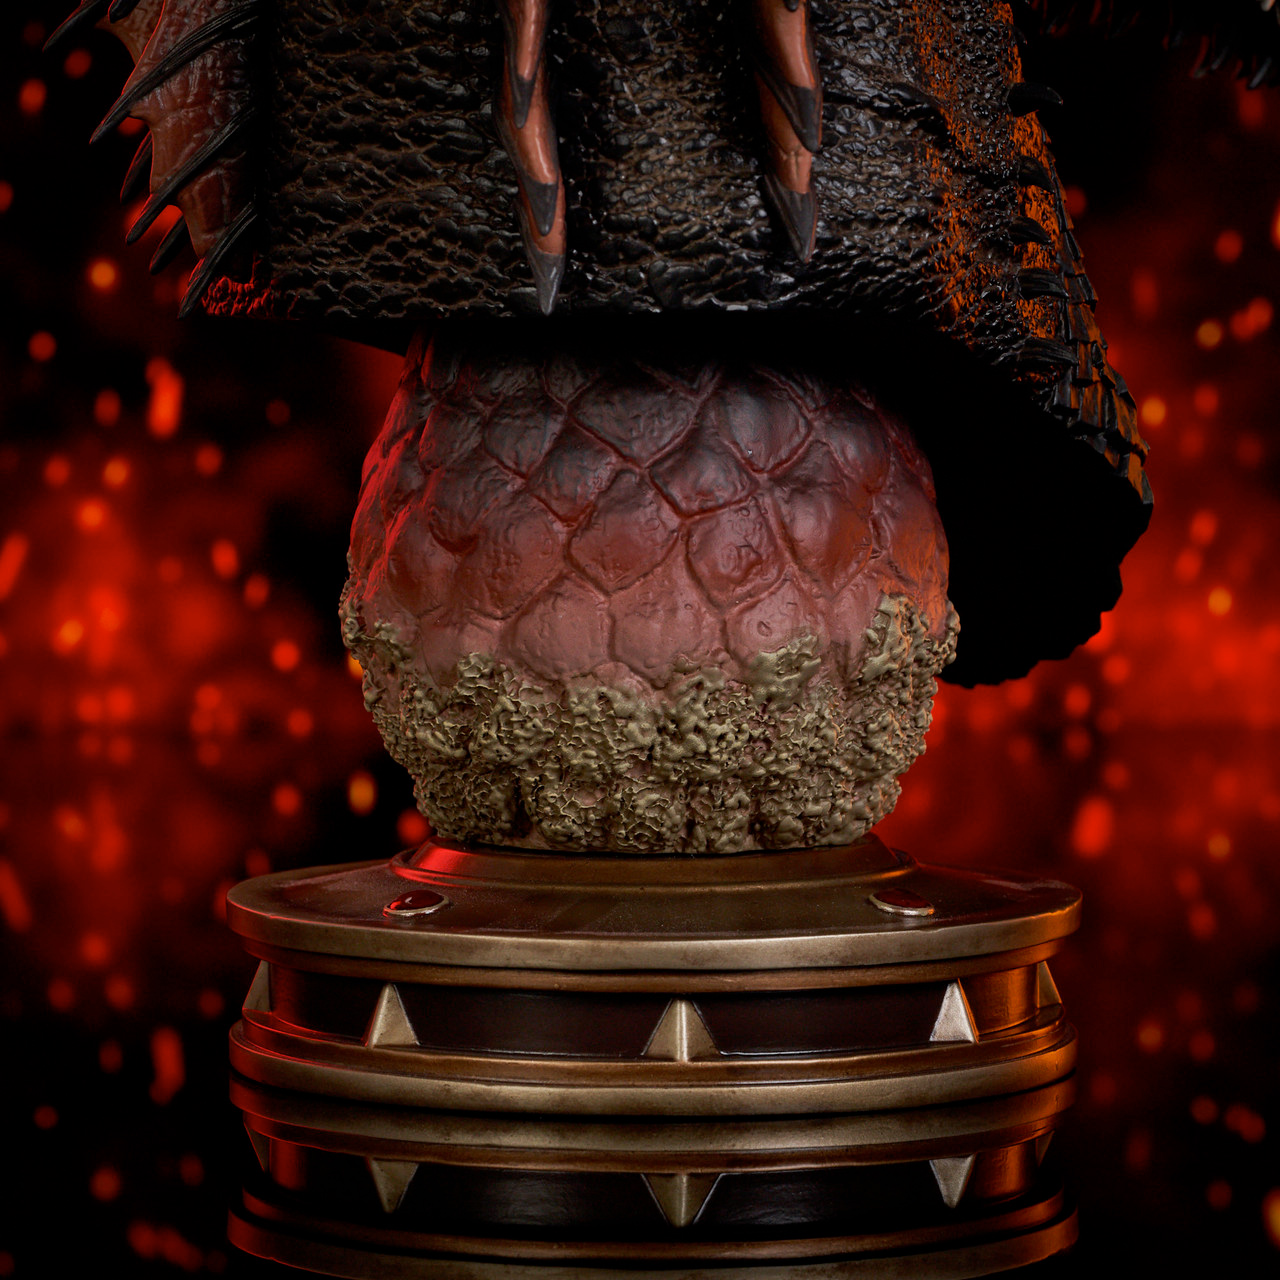 Drogon Legends in 3D Game of Thrones 1:2 Scale Bust